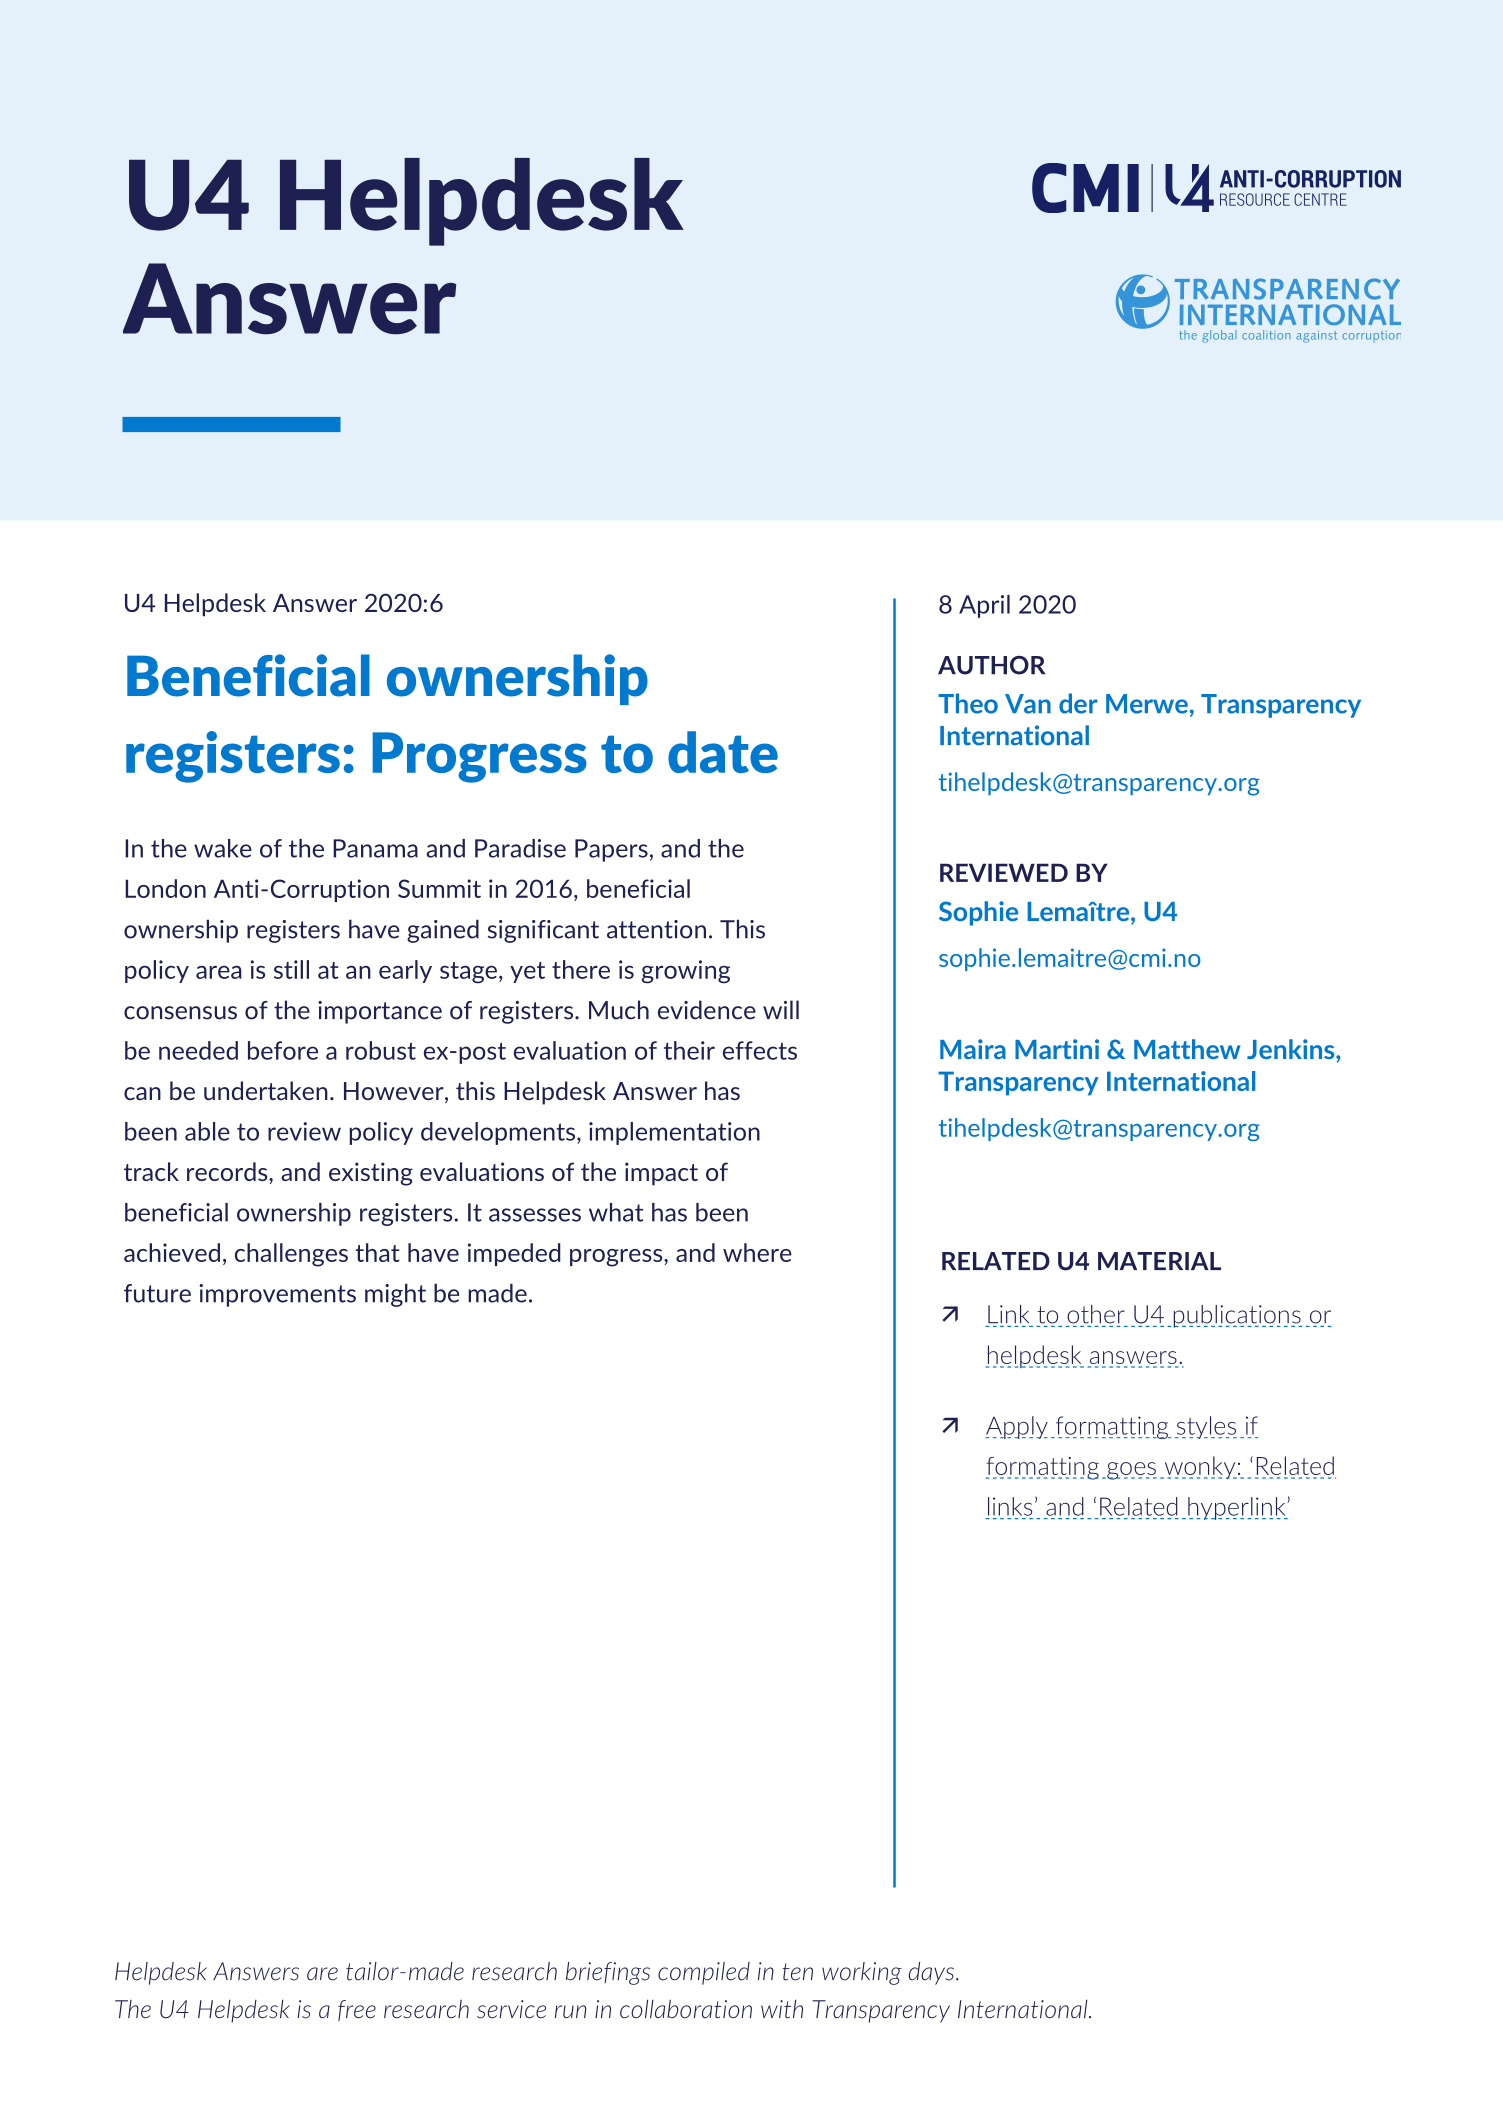 Beneficial ownership registers: Progress to date